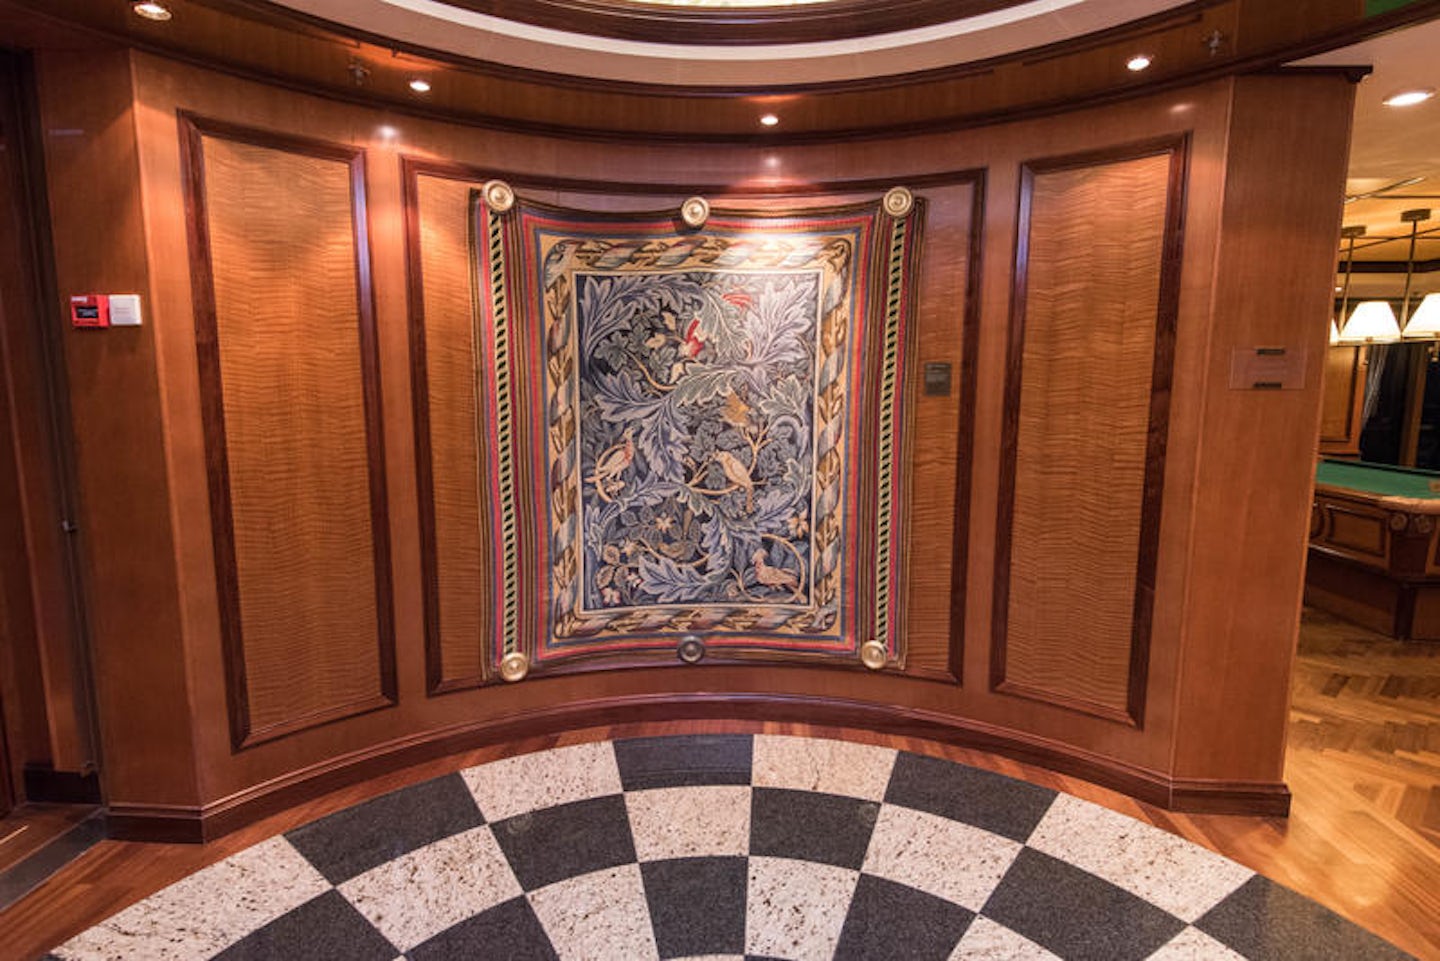 The Colony Club on Brilliance of the Seas